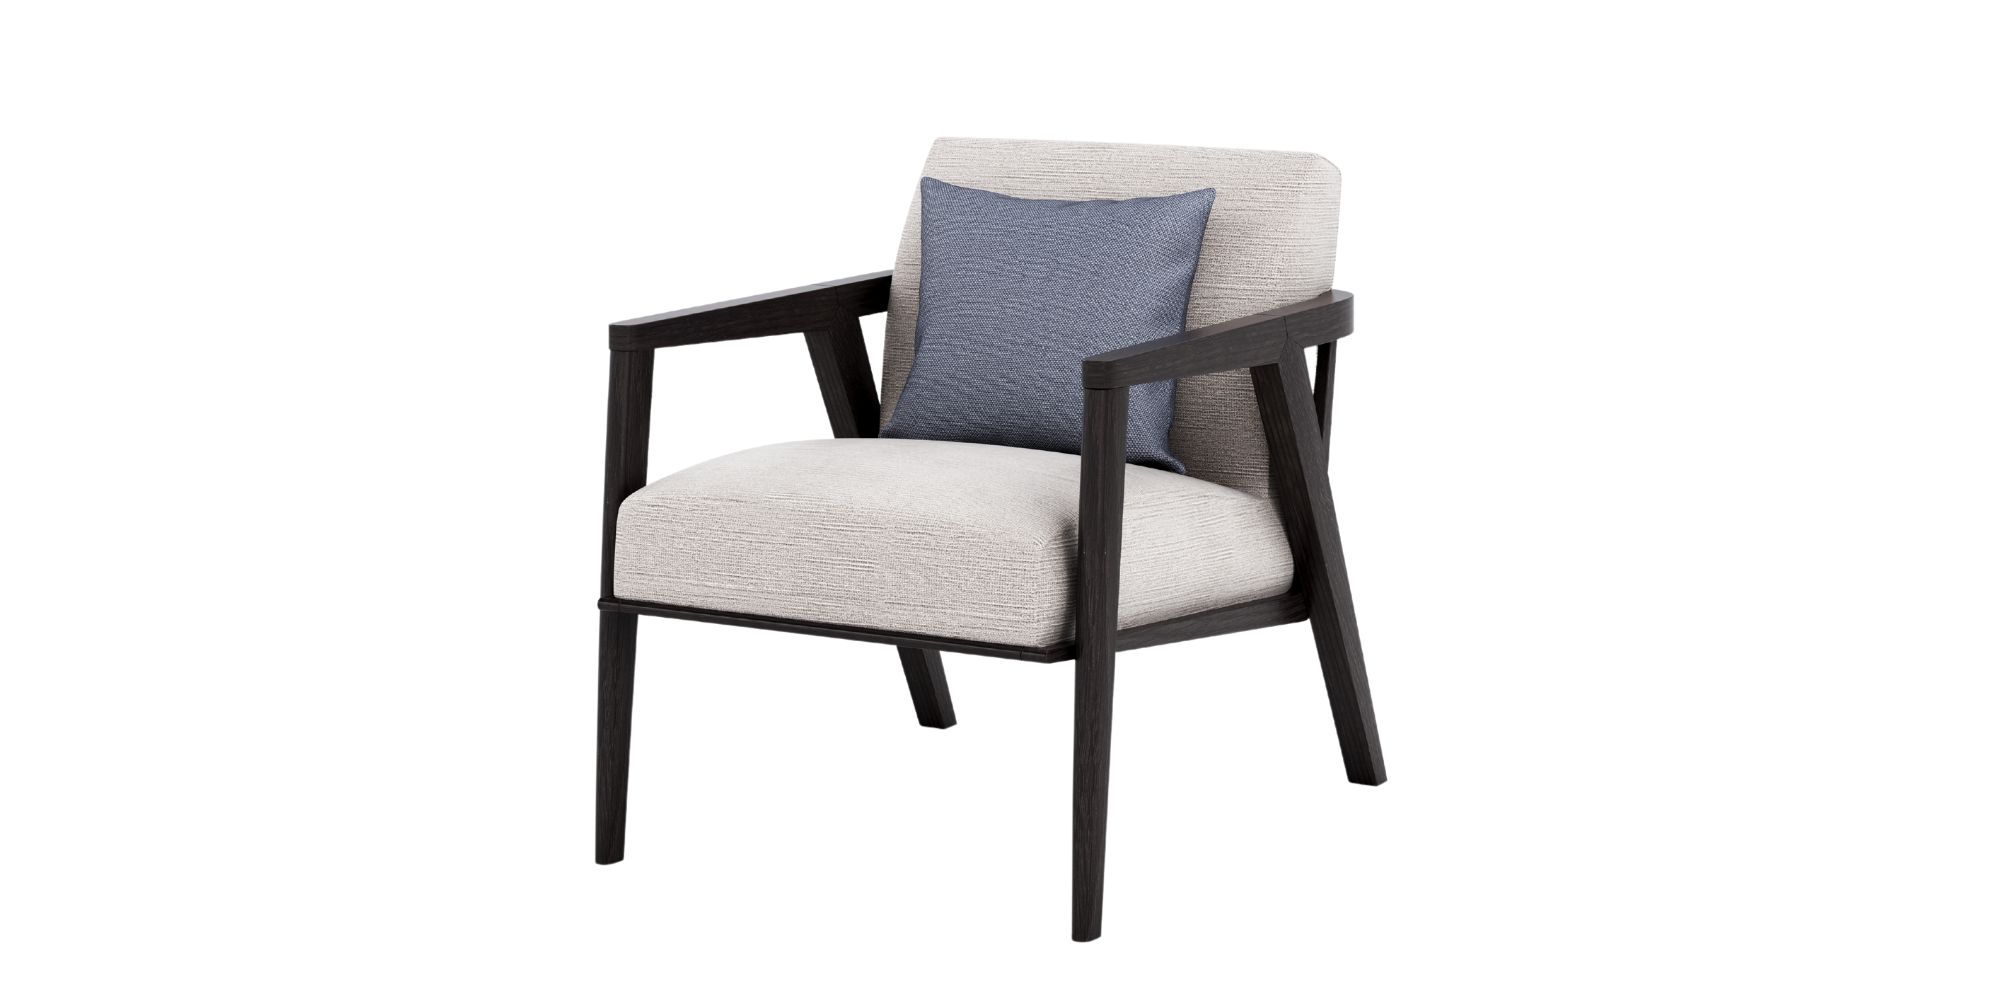 Folie Portette Chair – Unbuttoned in Outdoor Chairs for Folie collection